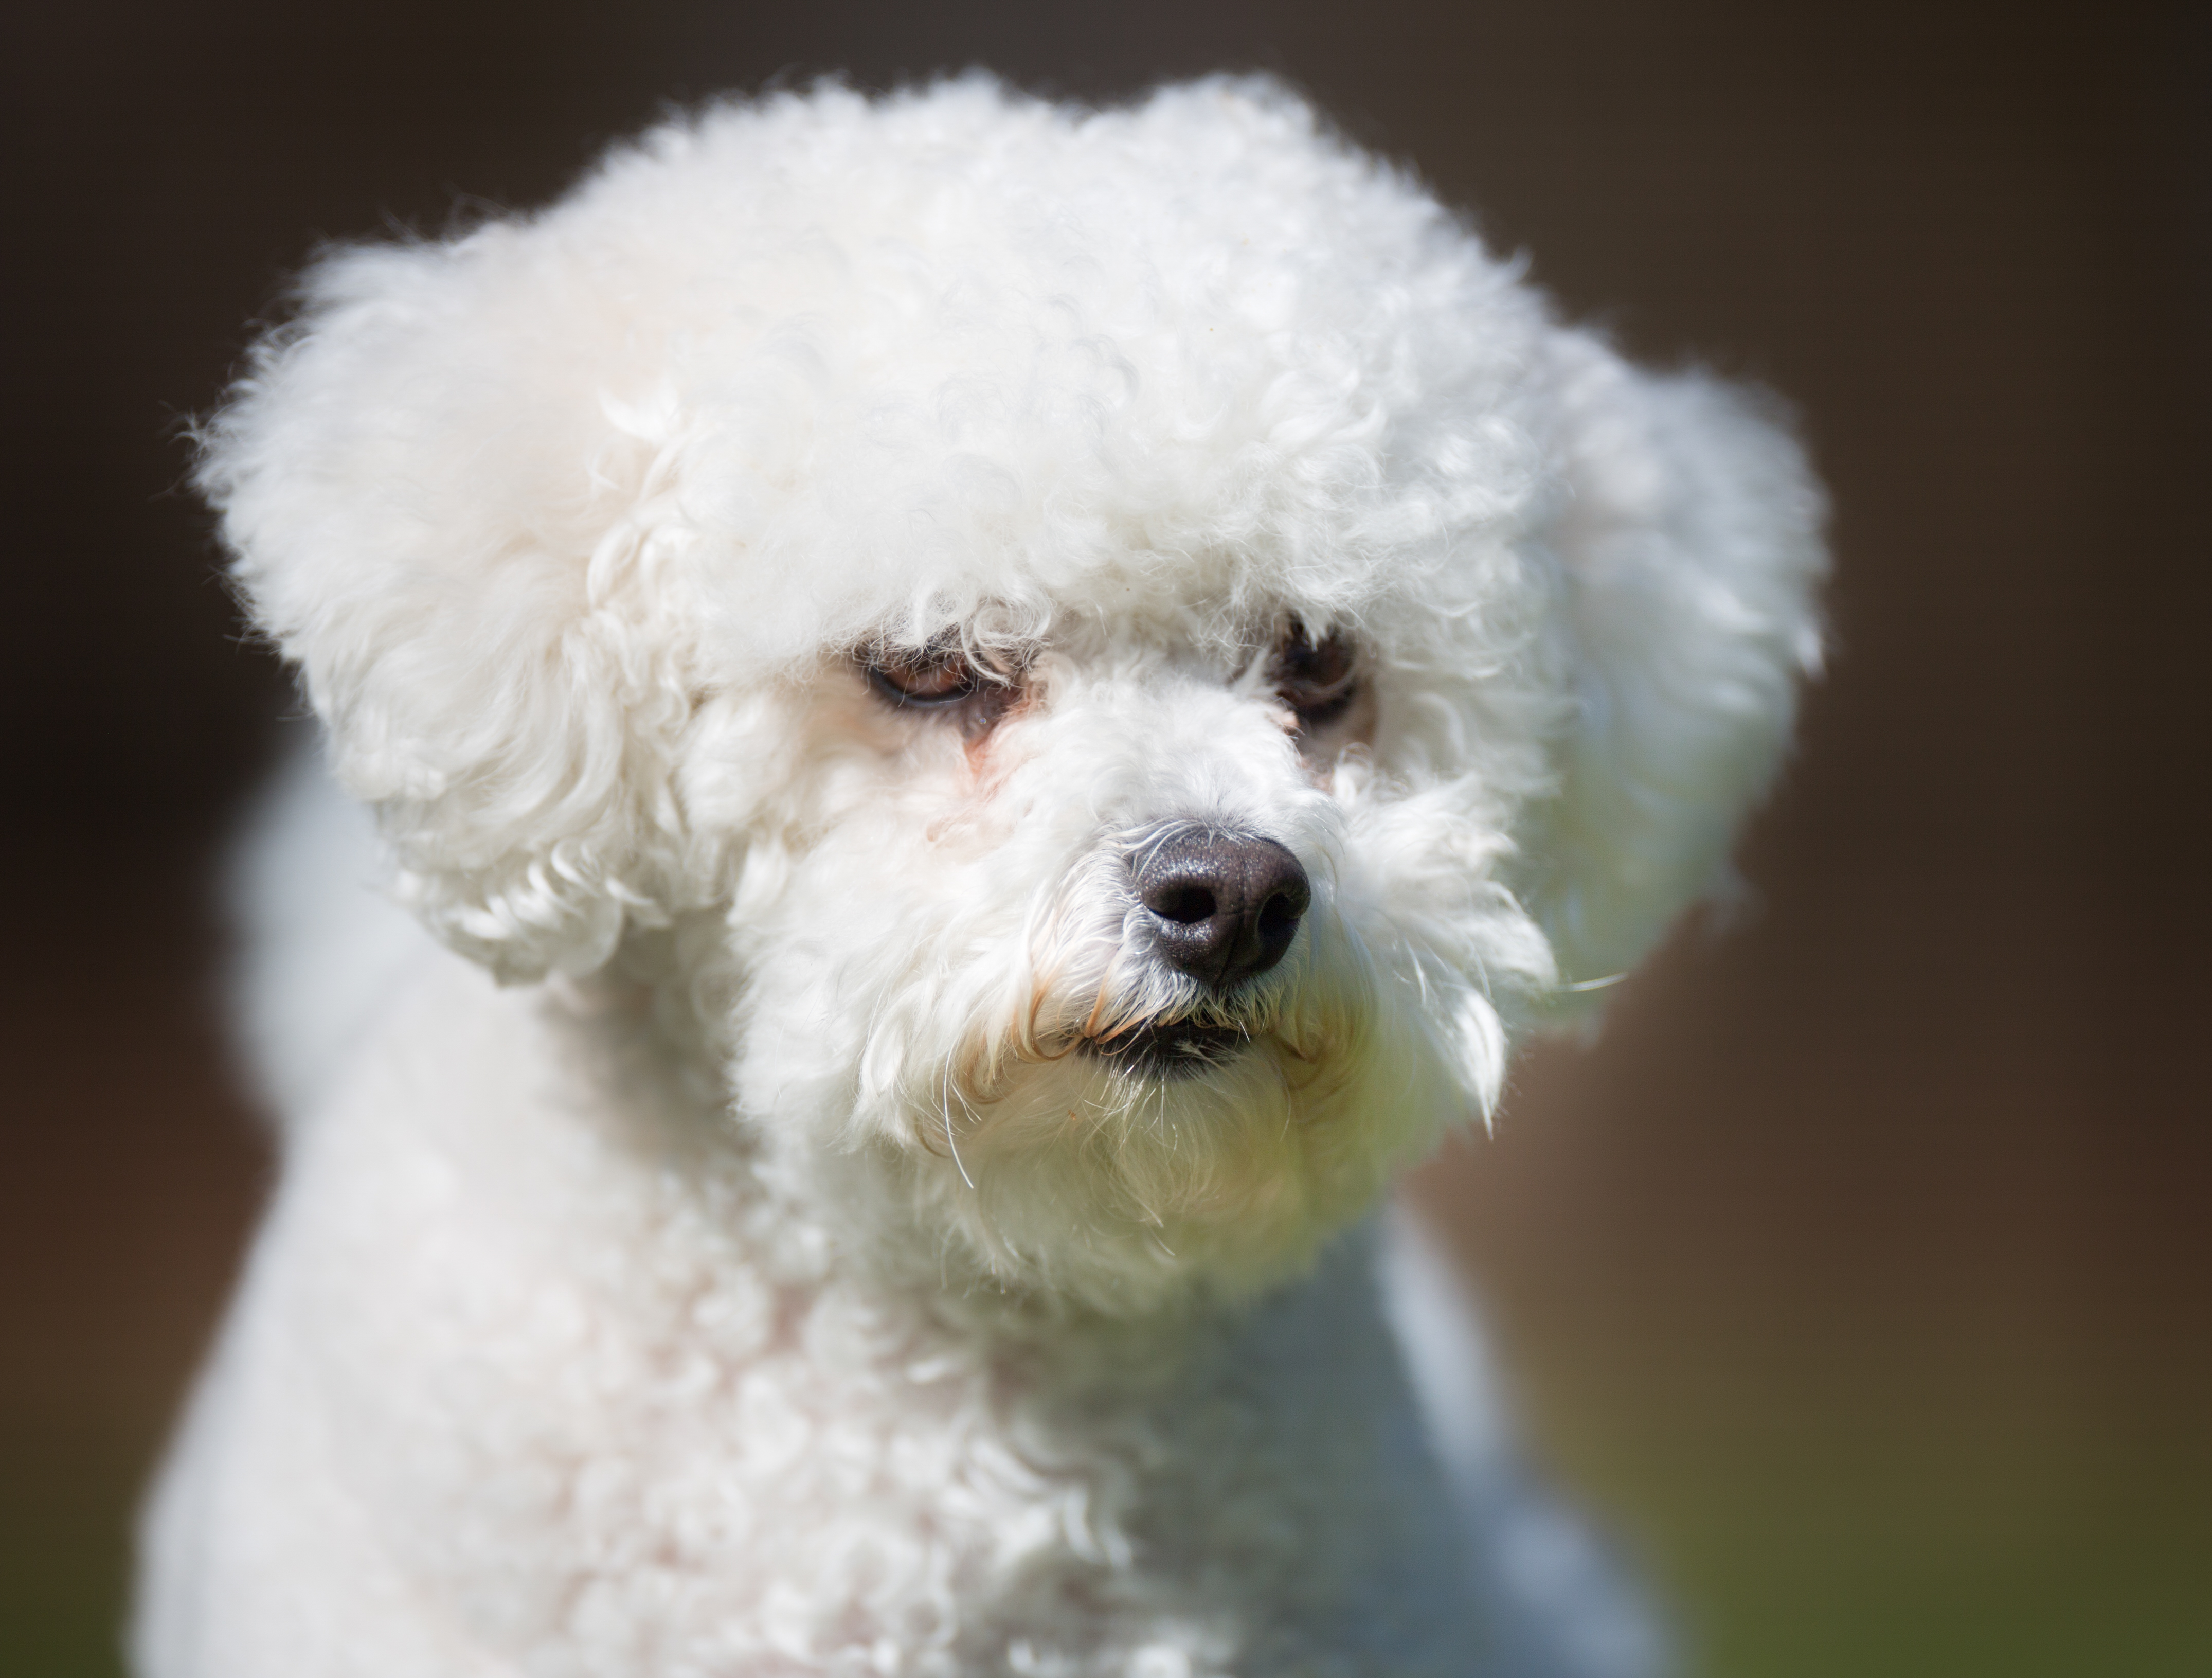 Toy Poodles are loving and cute dogs. This can also make them spoiled and will lead to bad behavior. You need understand through proper dog training, what to do to have a great Toy Poodle